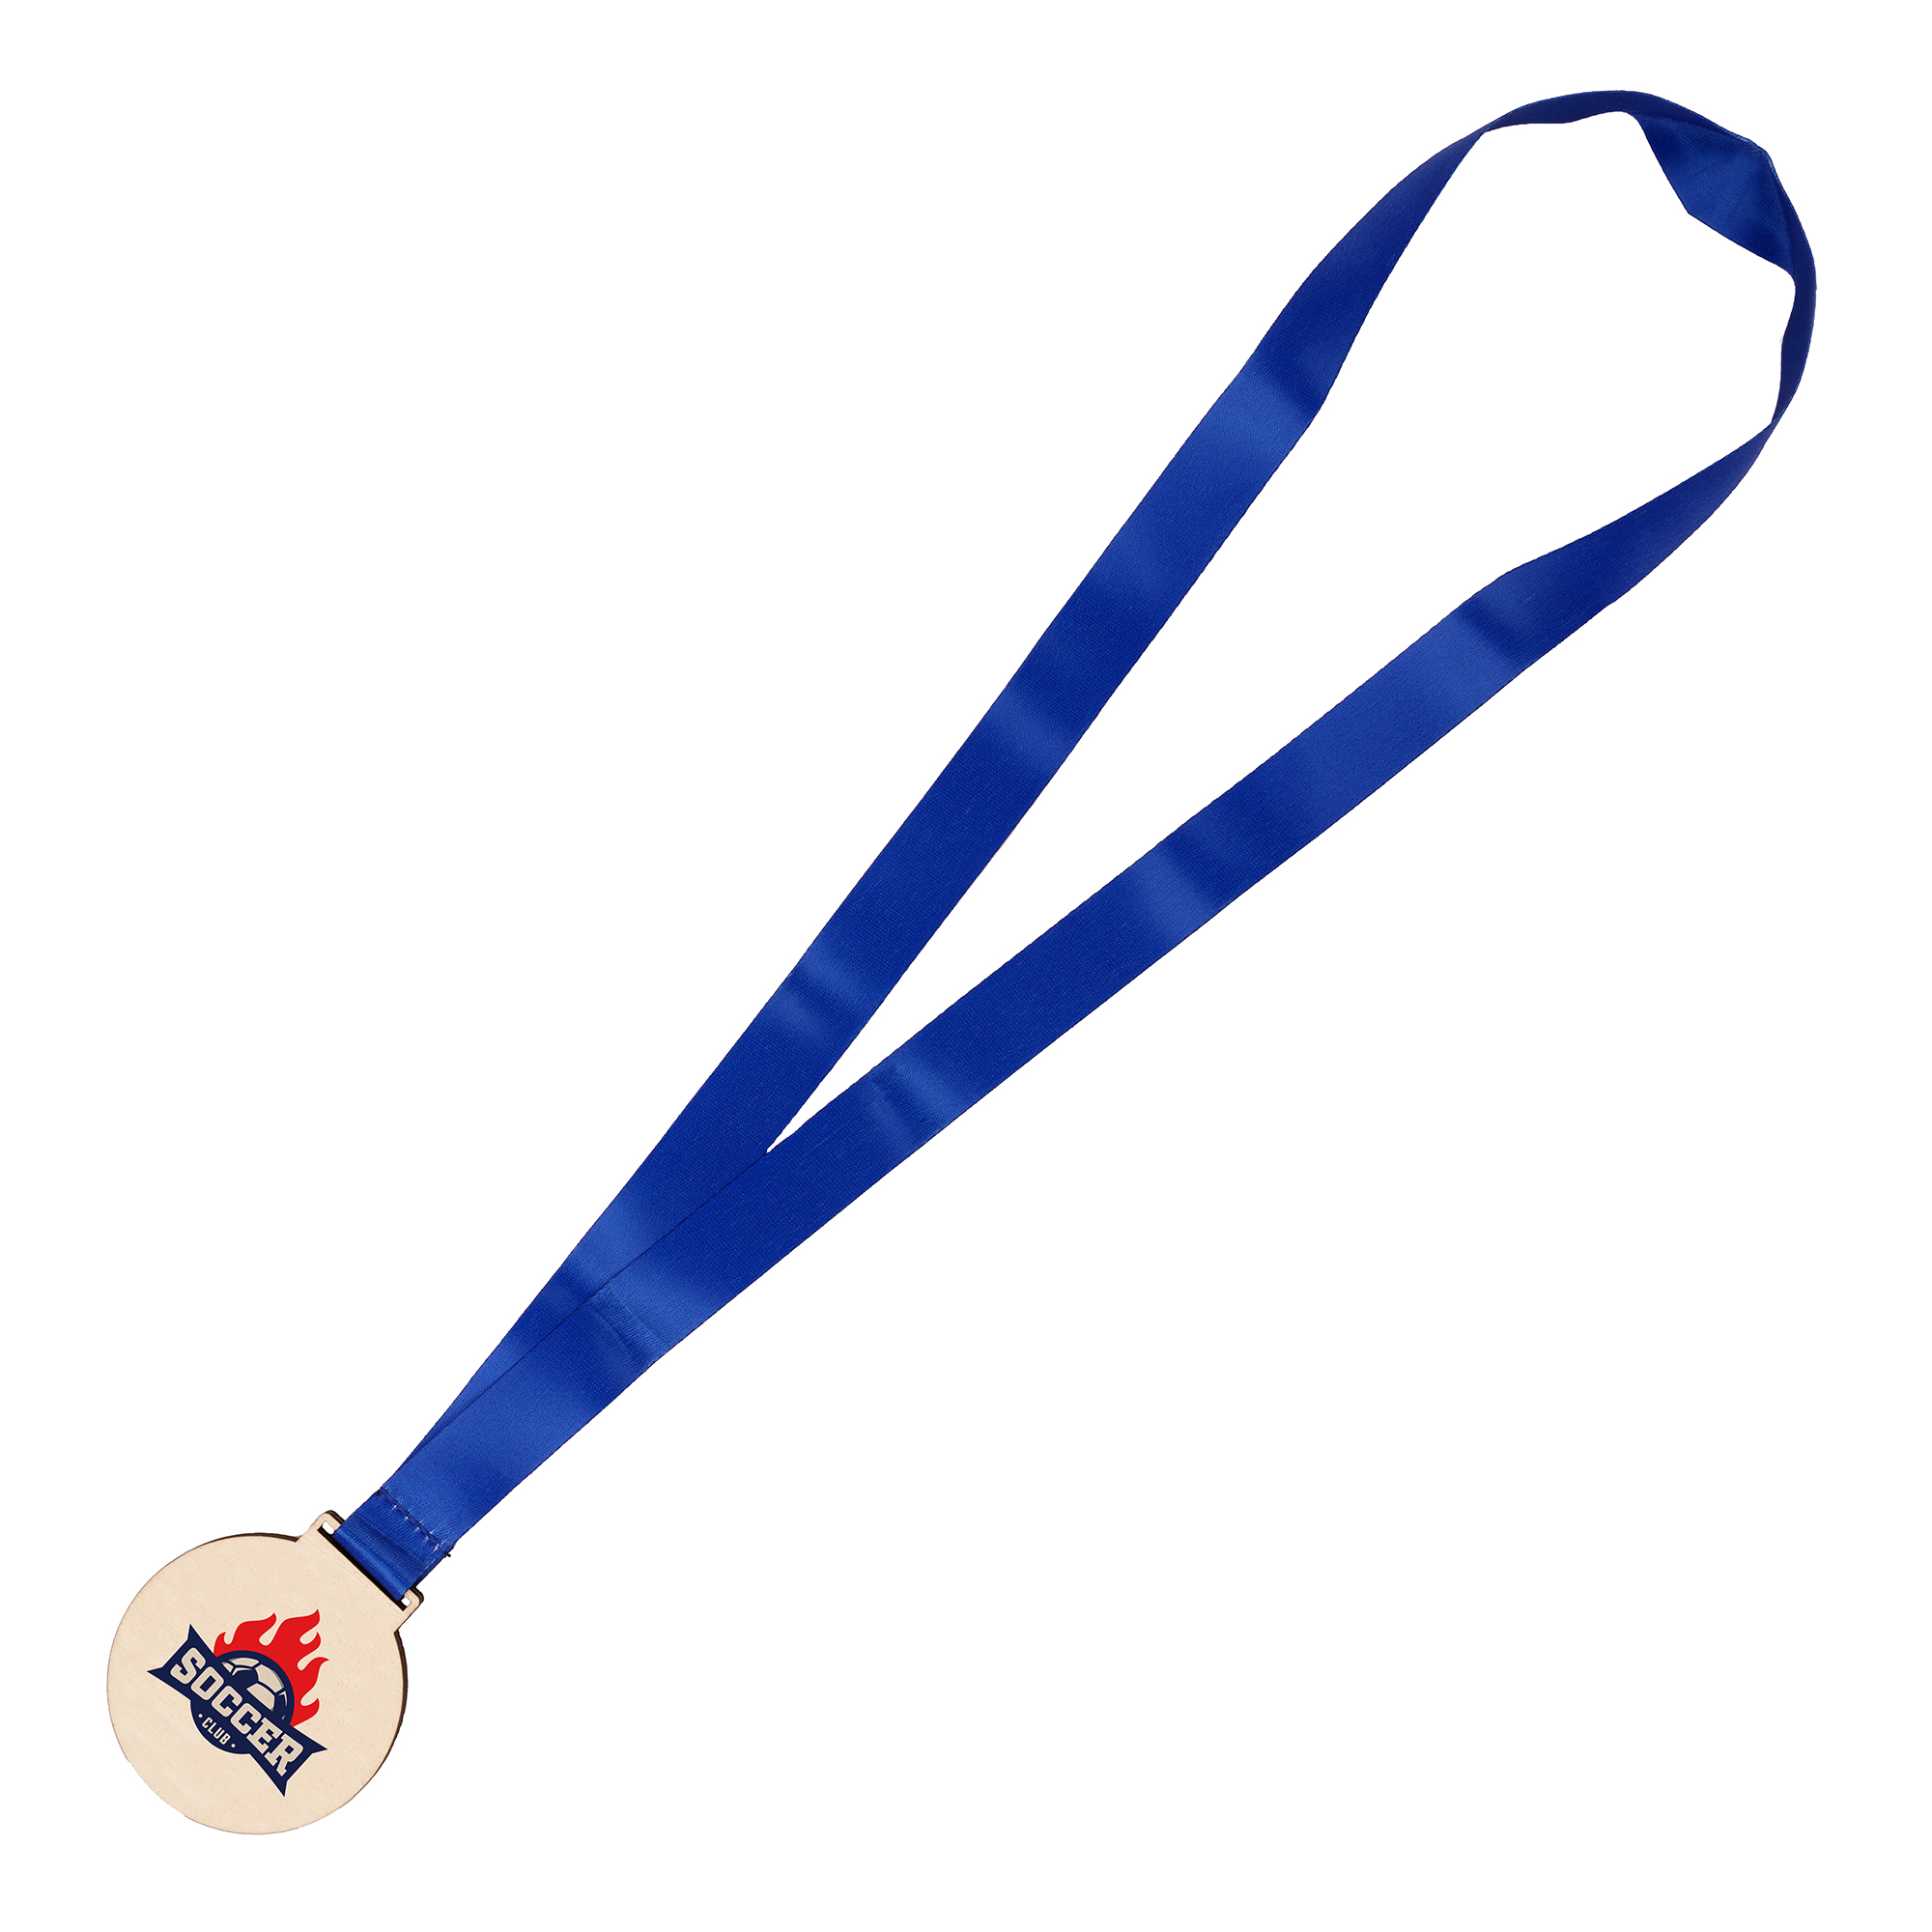 Eco-friendly fully bespoke shaped bamboo medal attached to printed satin ribbon or polyester lanyard.